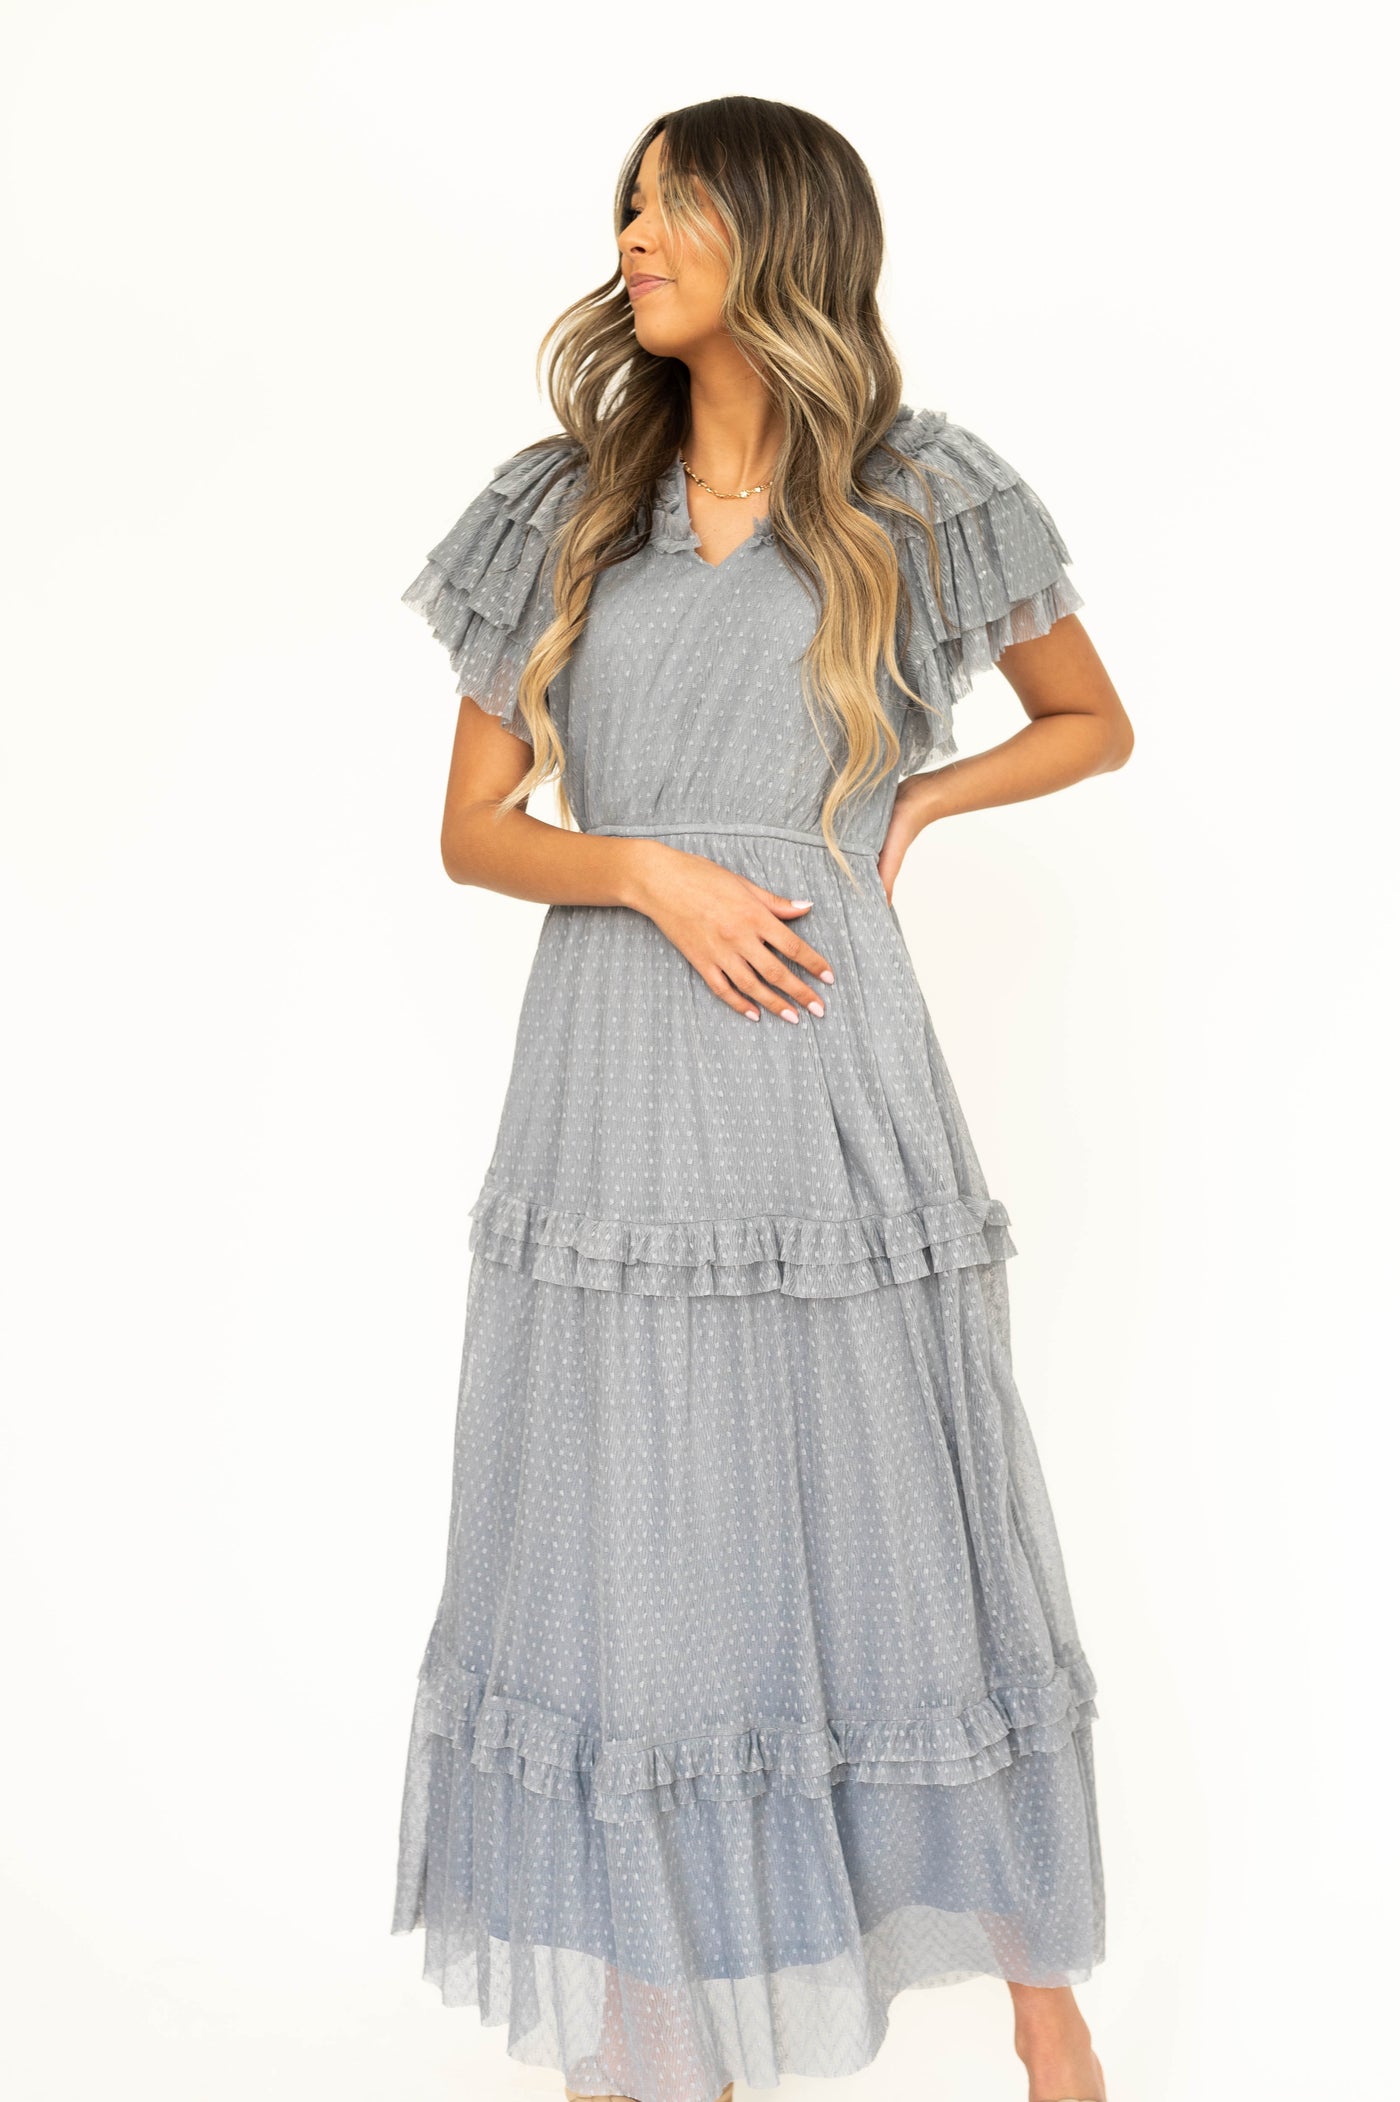 Blue gray lace short sleeve dress with ruffles on sleeves and neck.